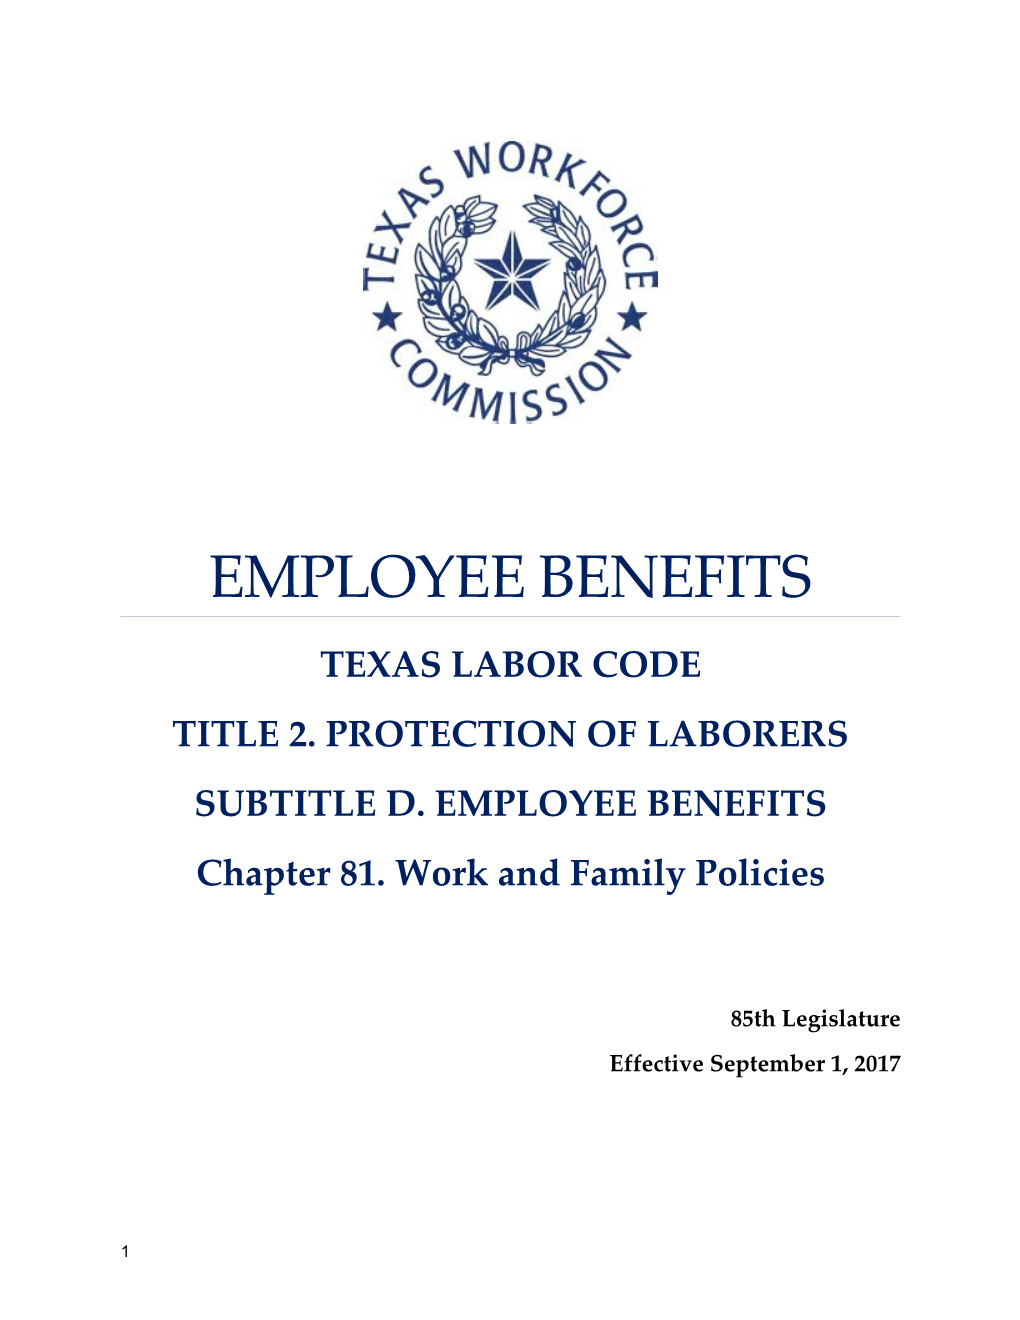 Chapter 81, Labor Code - Work and Family Policies